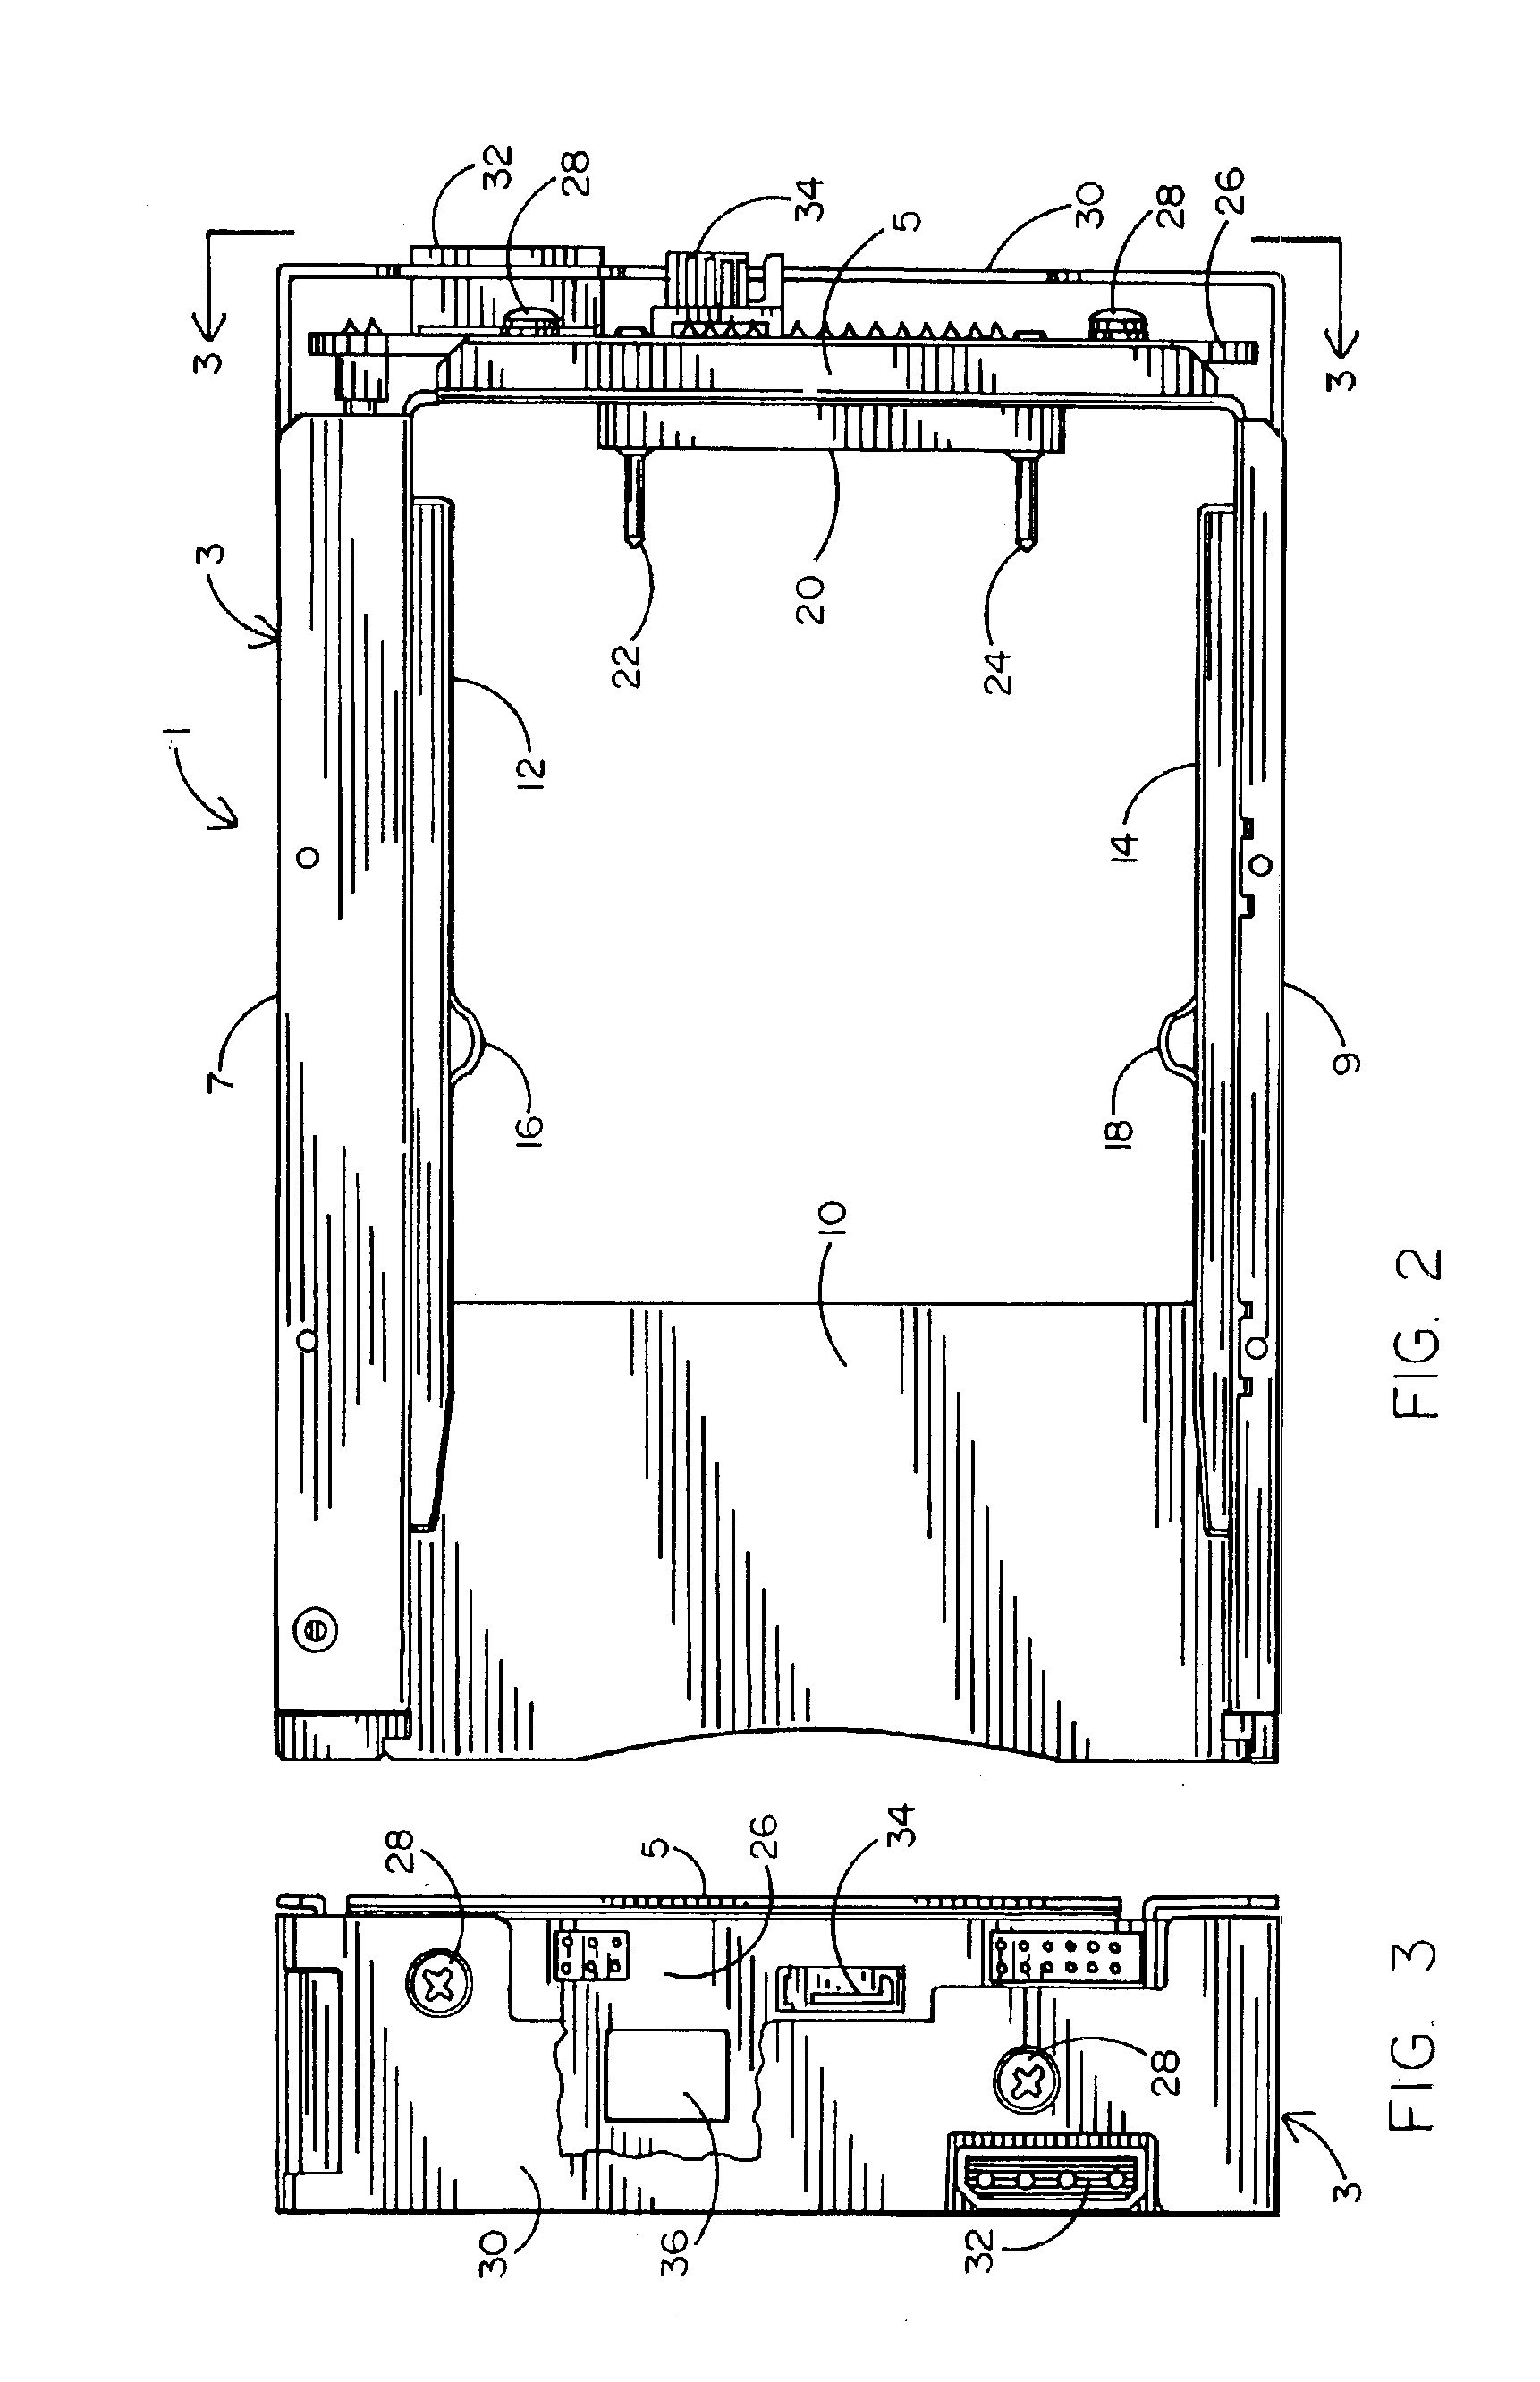 Universal receptacles for interchangeably receiving different removable computer drive carriers